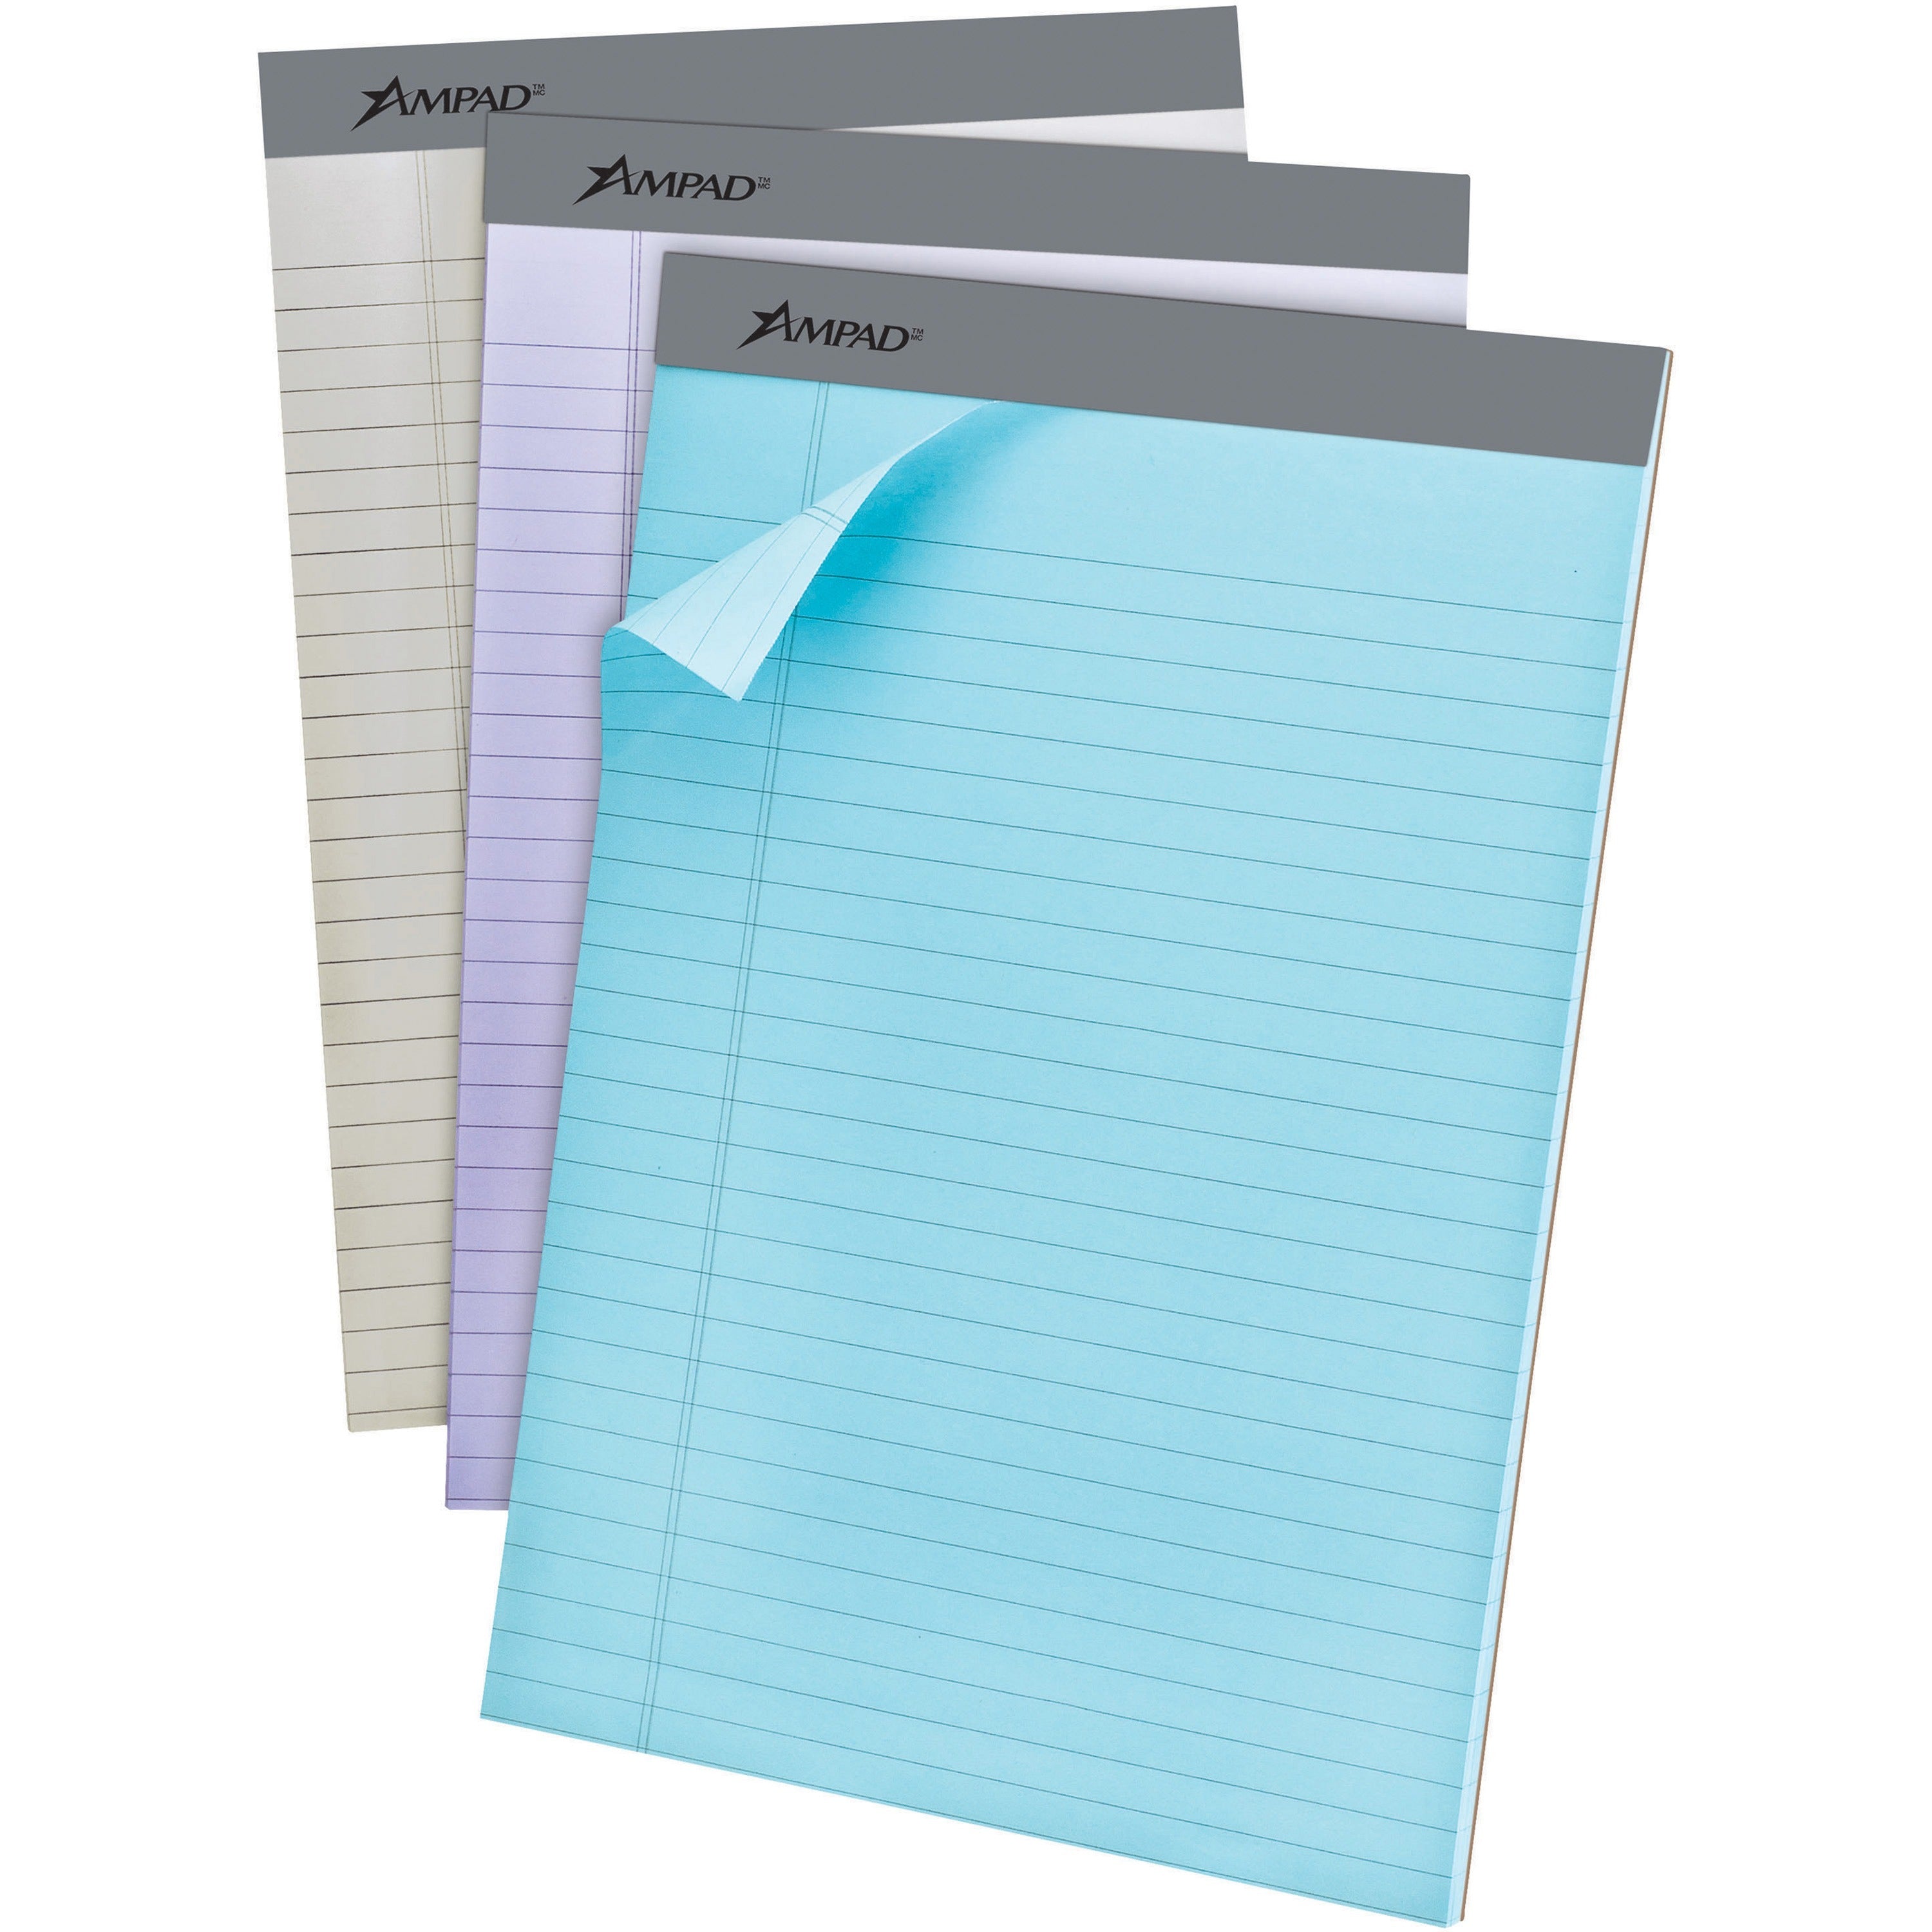 Ampad Pastel Perforated Pad - 50 Sheets - 0.34" Ruled - 15 lb Basis Weight - Letter - 8 1/2" x 11" - Micro Perforated - 6 / Pack - 